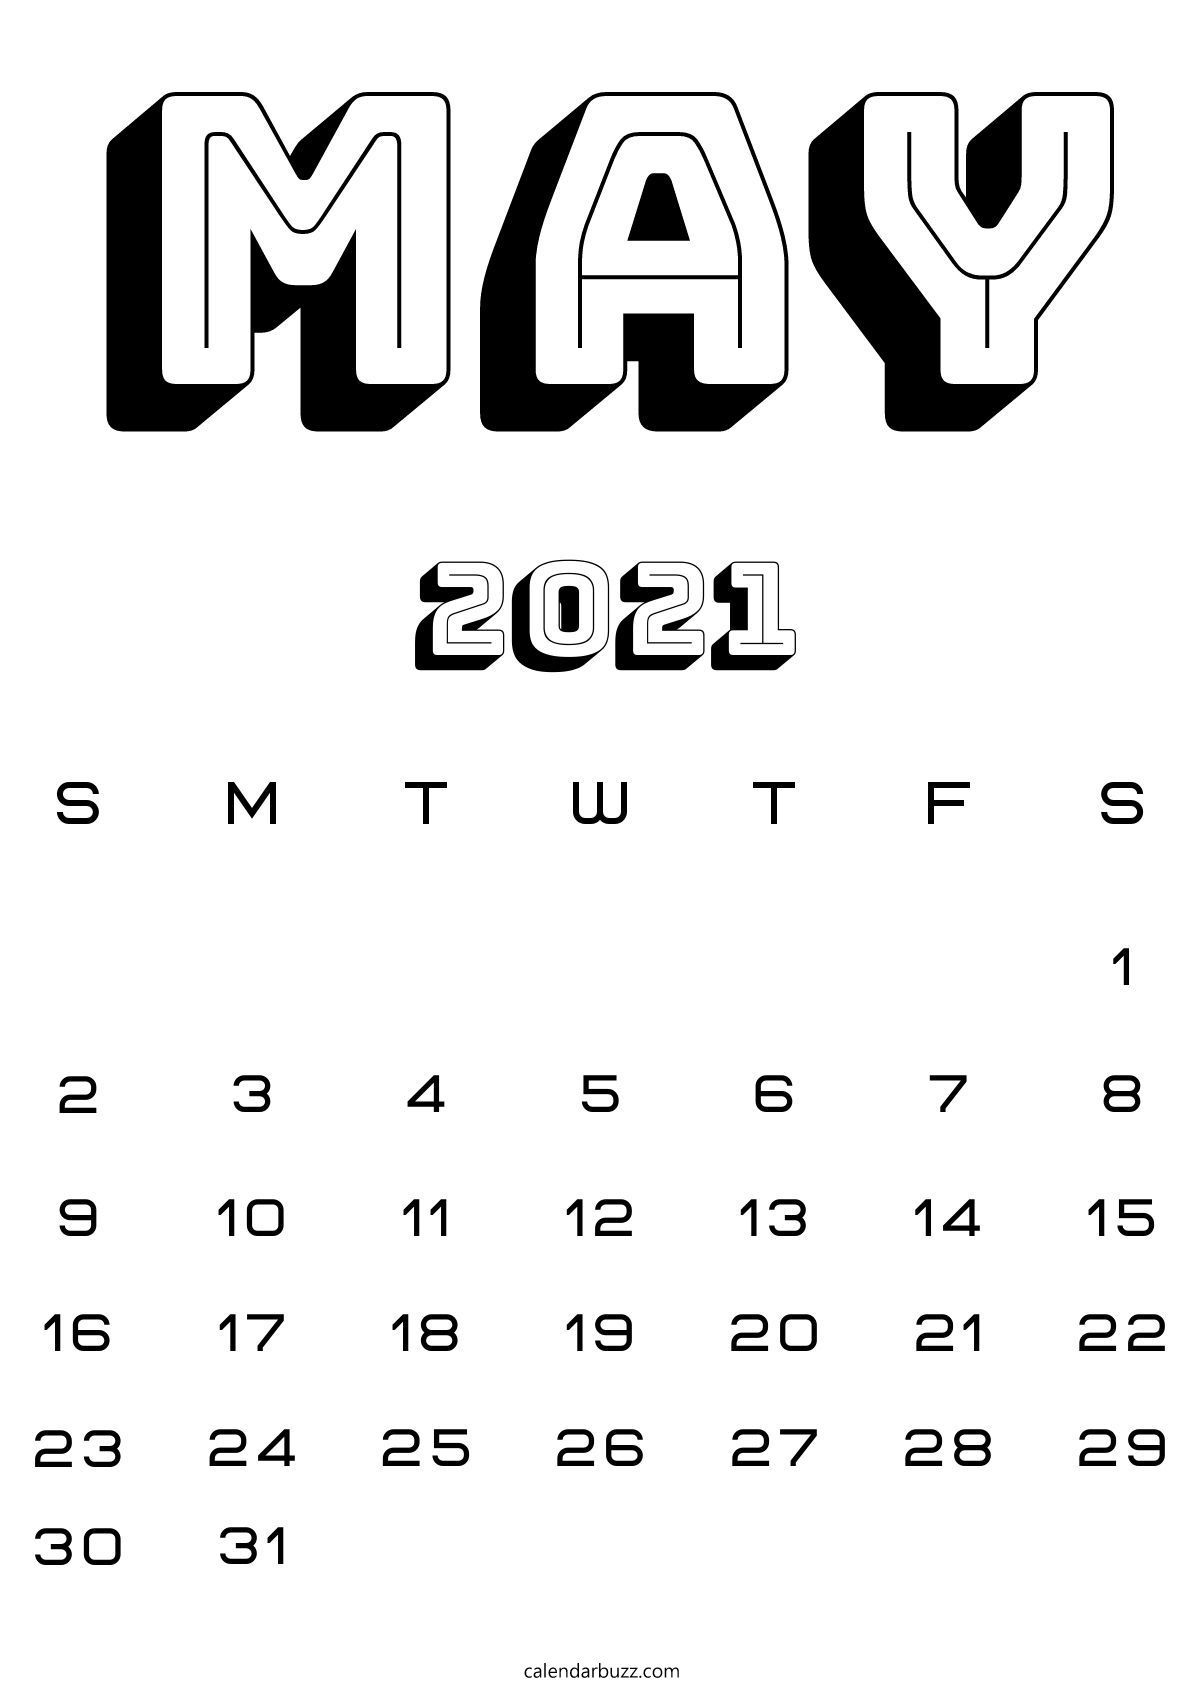 May 2021 Calligraphy Stylish Font Calendar In 2021 | Calendar in Printable Month Calligraphy Clander